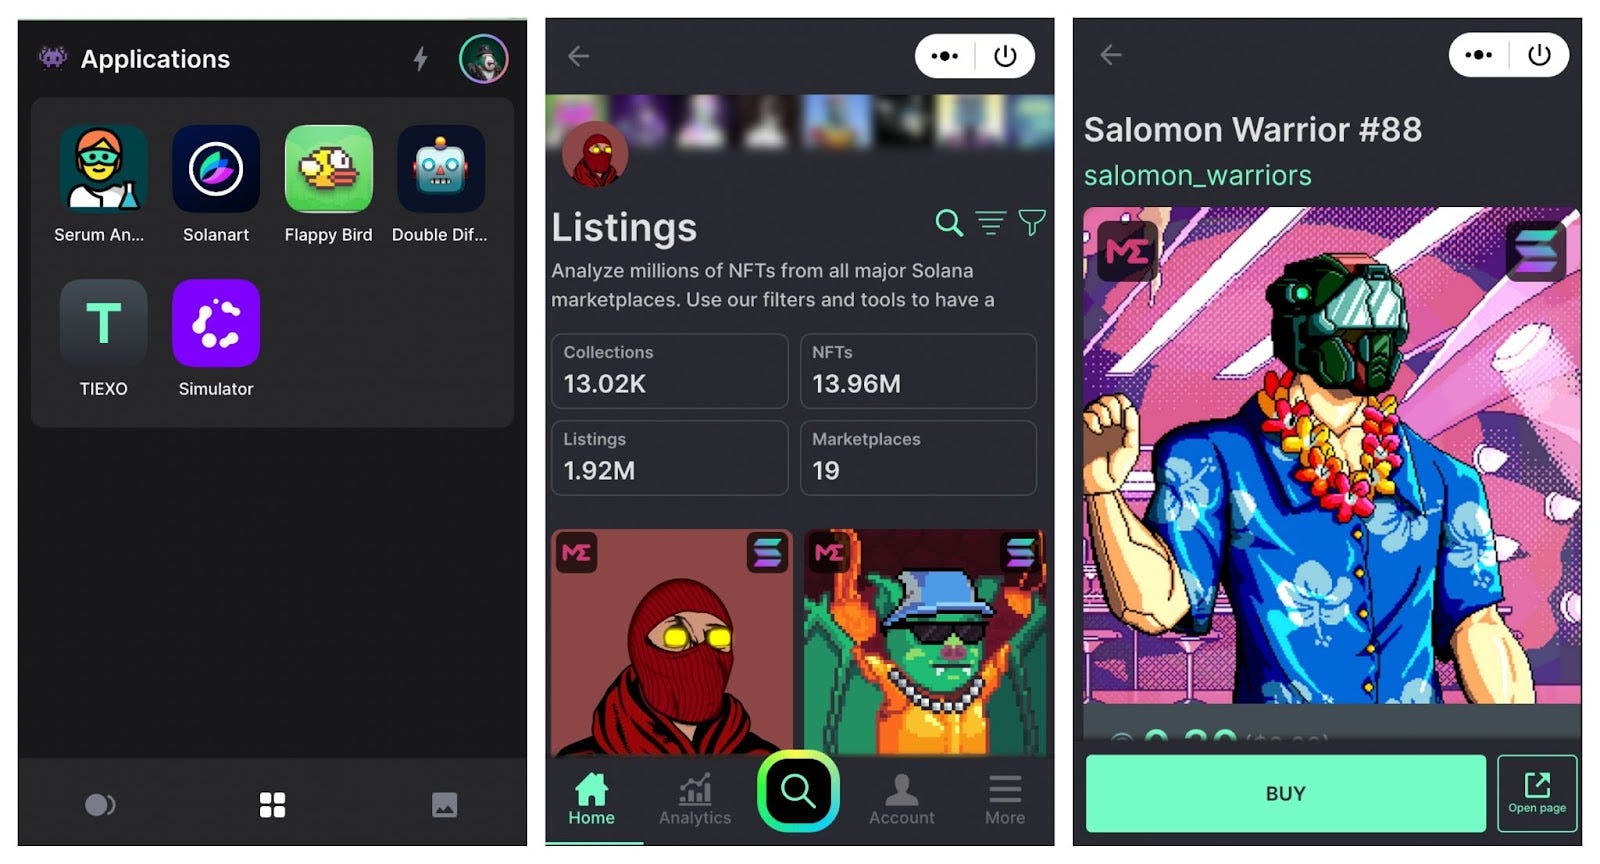 The Next 'Flappy Bird' Gets Seed Funding From Major DeFi Investors